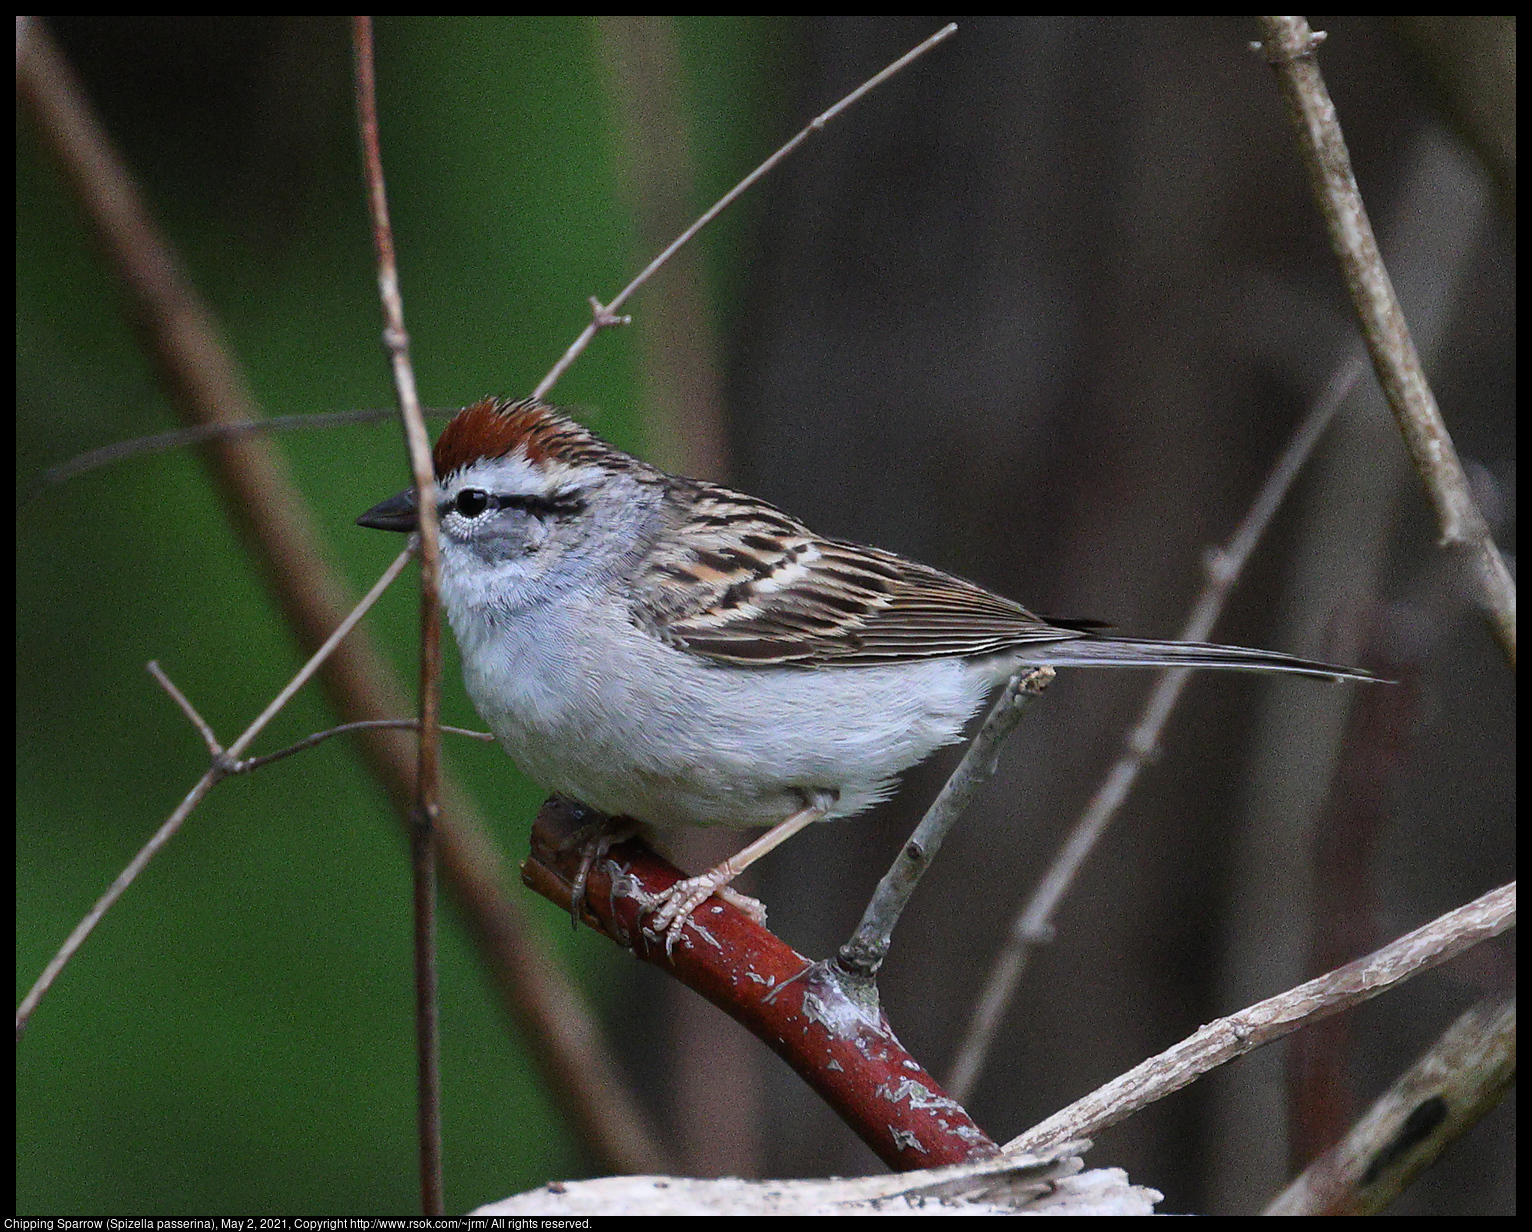 Chipping Sparrow (Spizella passerina), May 2, 2021